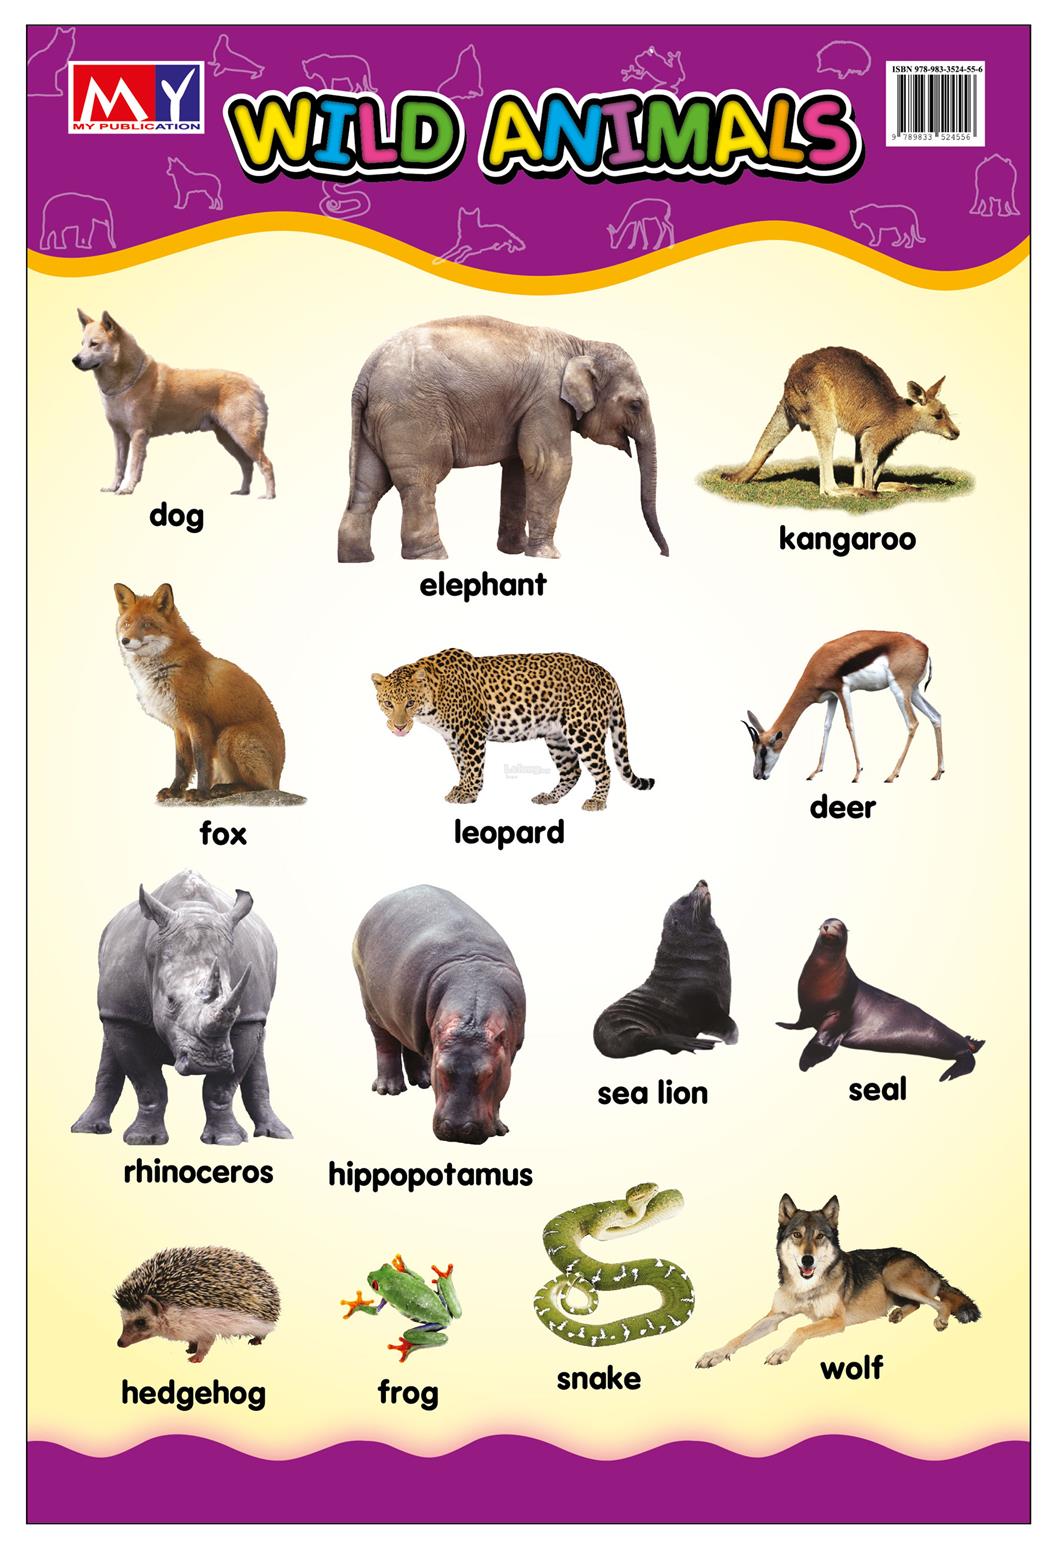 Education Poster  Wild  Animals  end 3 2 2022 10 15 AM 